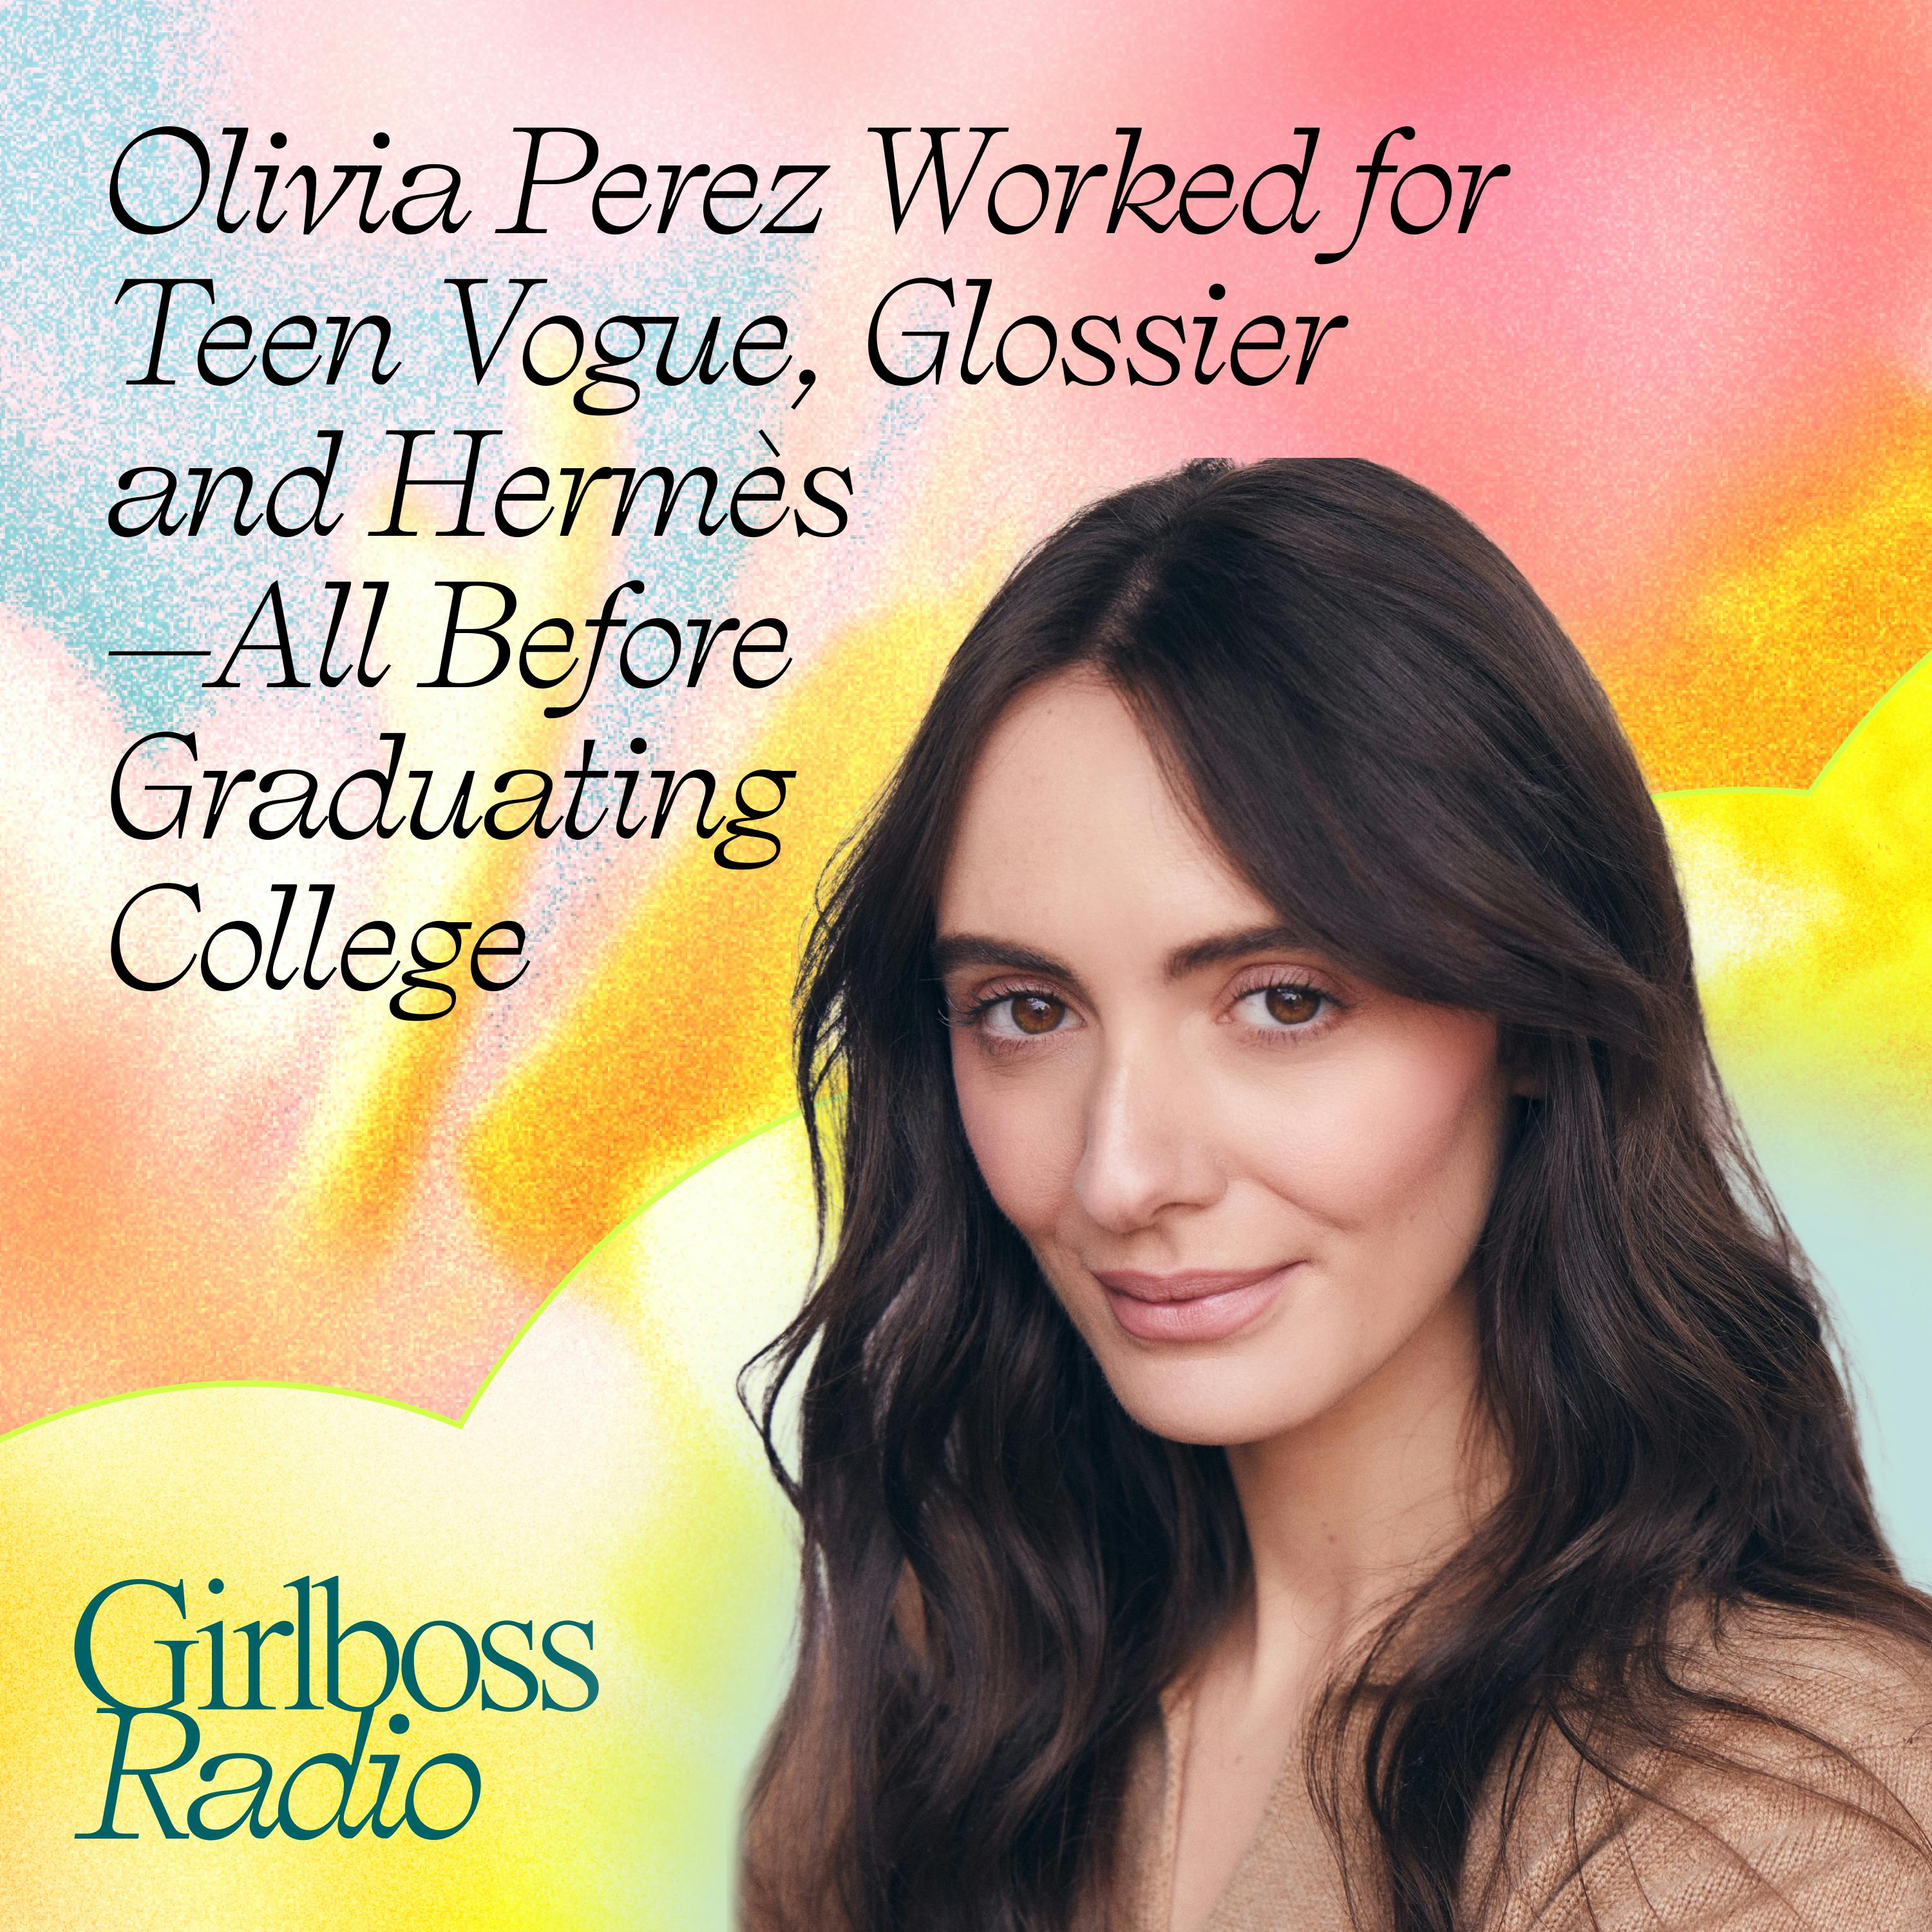 Olivia Perez Worked for Teen Vogue, Glossier and Hermès—All Before Graduating College